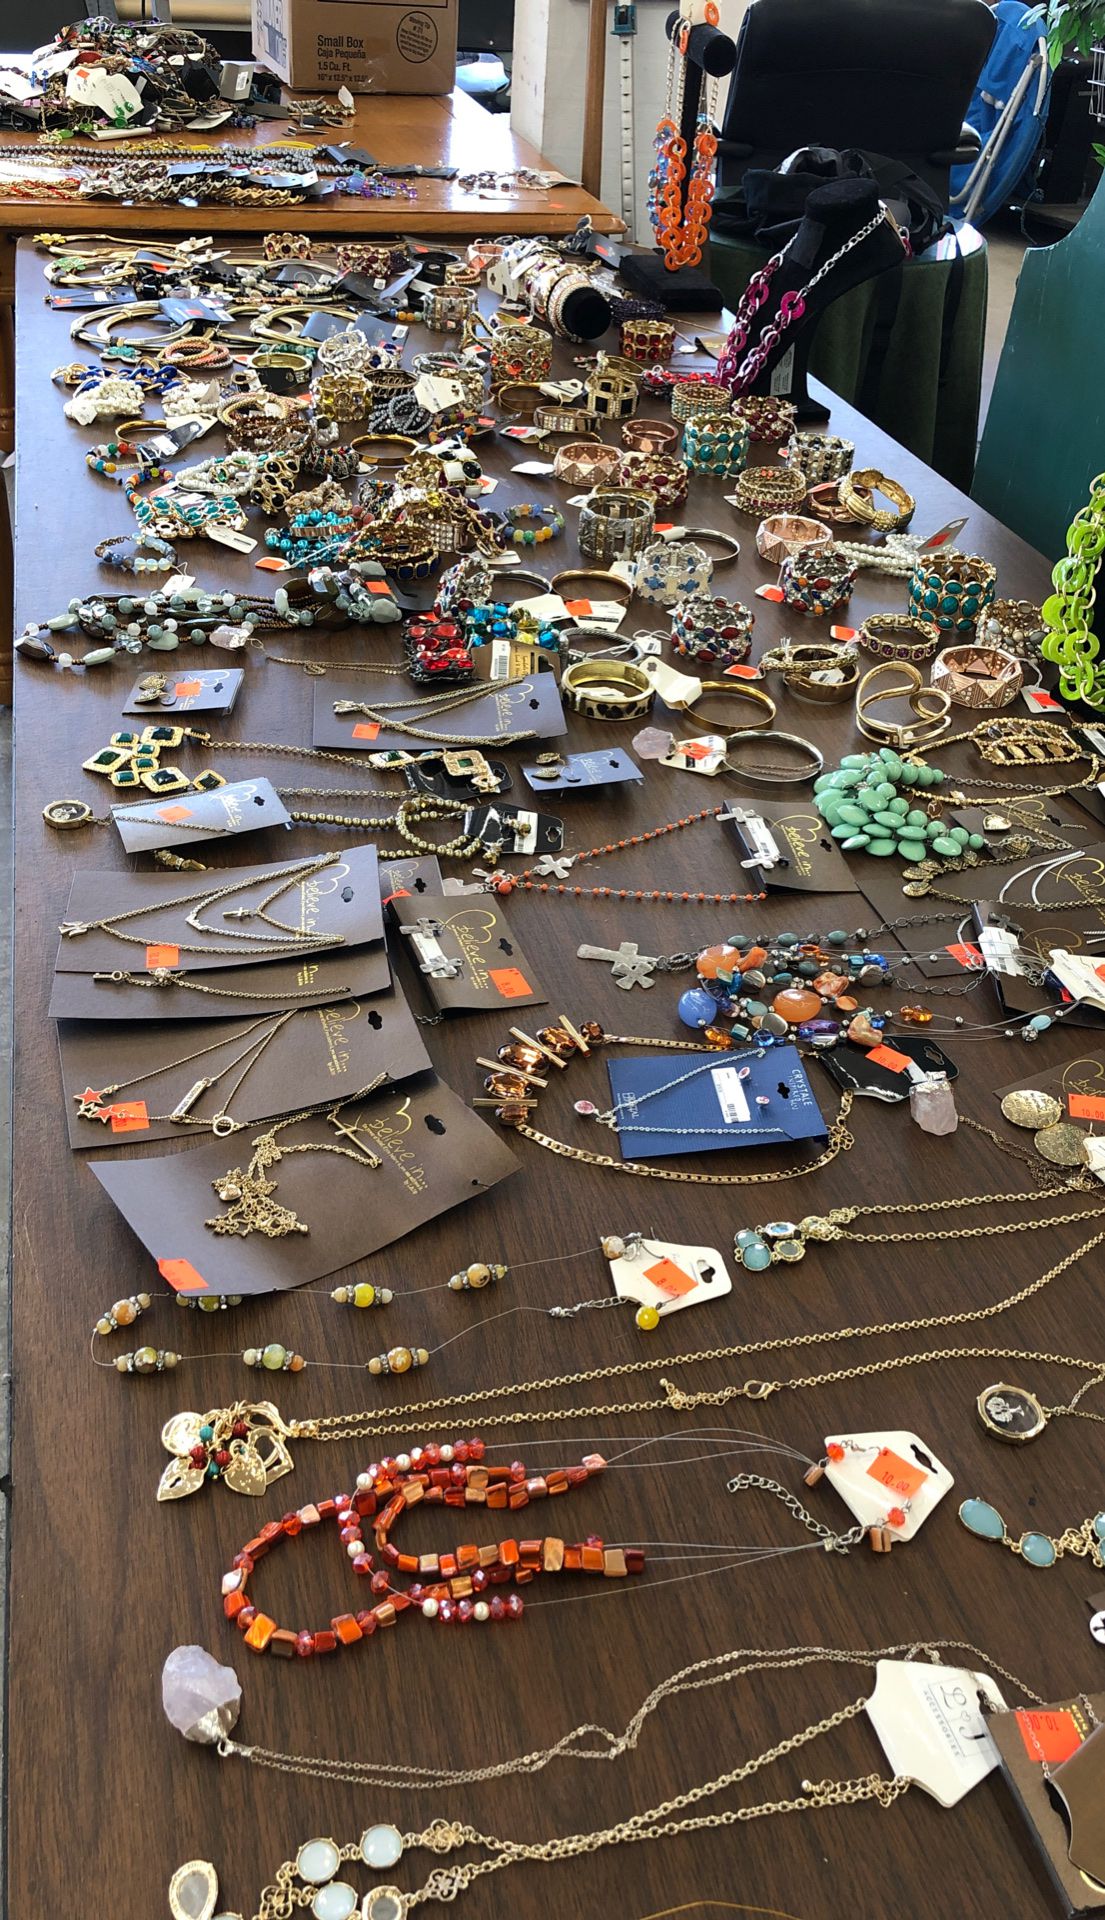 New costume jewelry 3 for $10